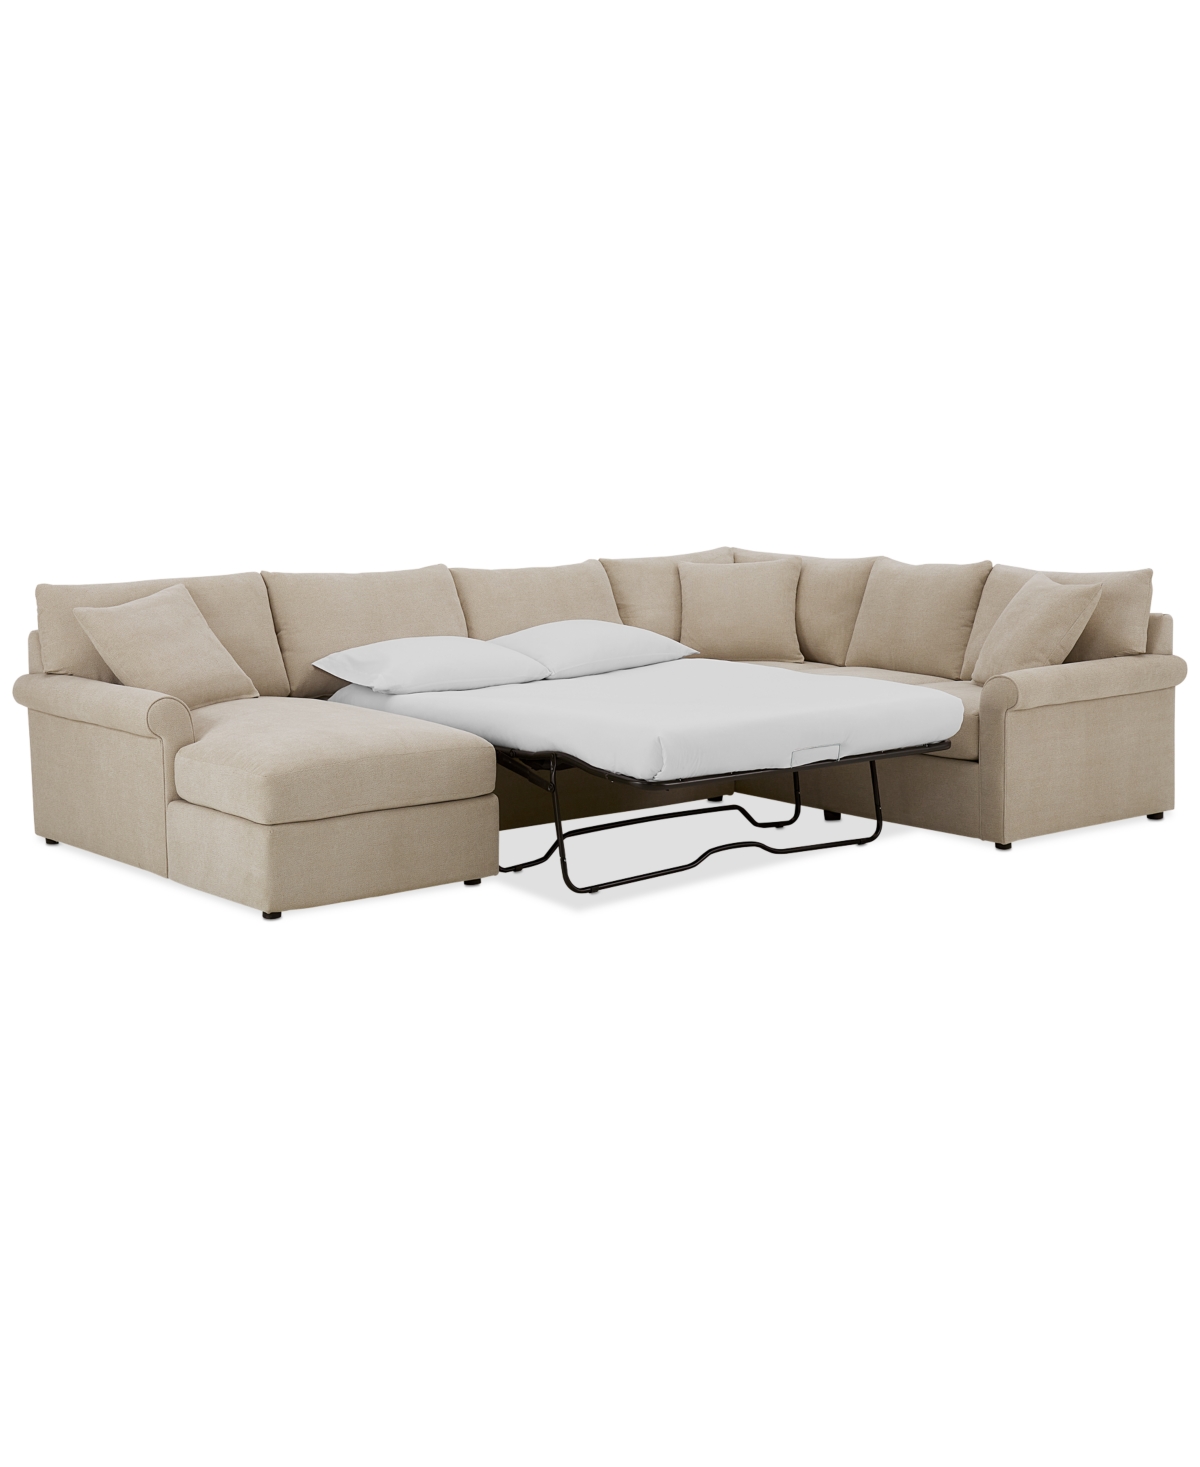 Furniture Wrenley 138" 3-pc. Fabric Sectional Chaise Sleeper Sofa, Created For Macy's In Dove